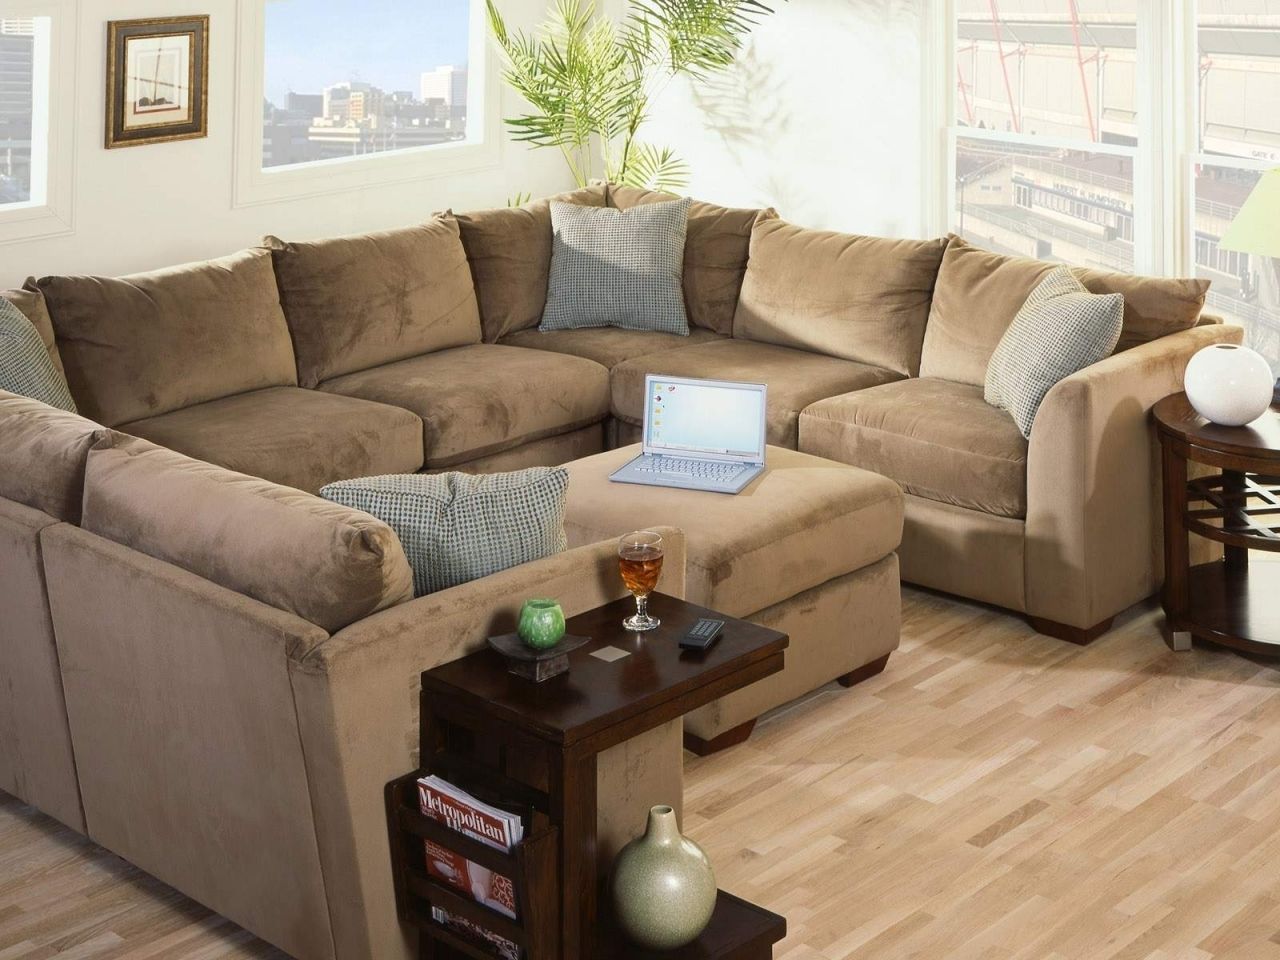 12 Collection of Big Lots Sofas 